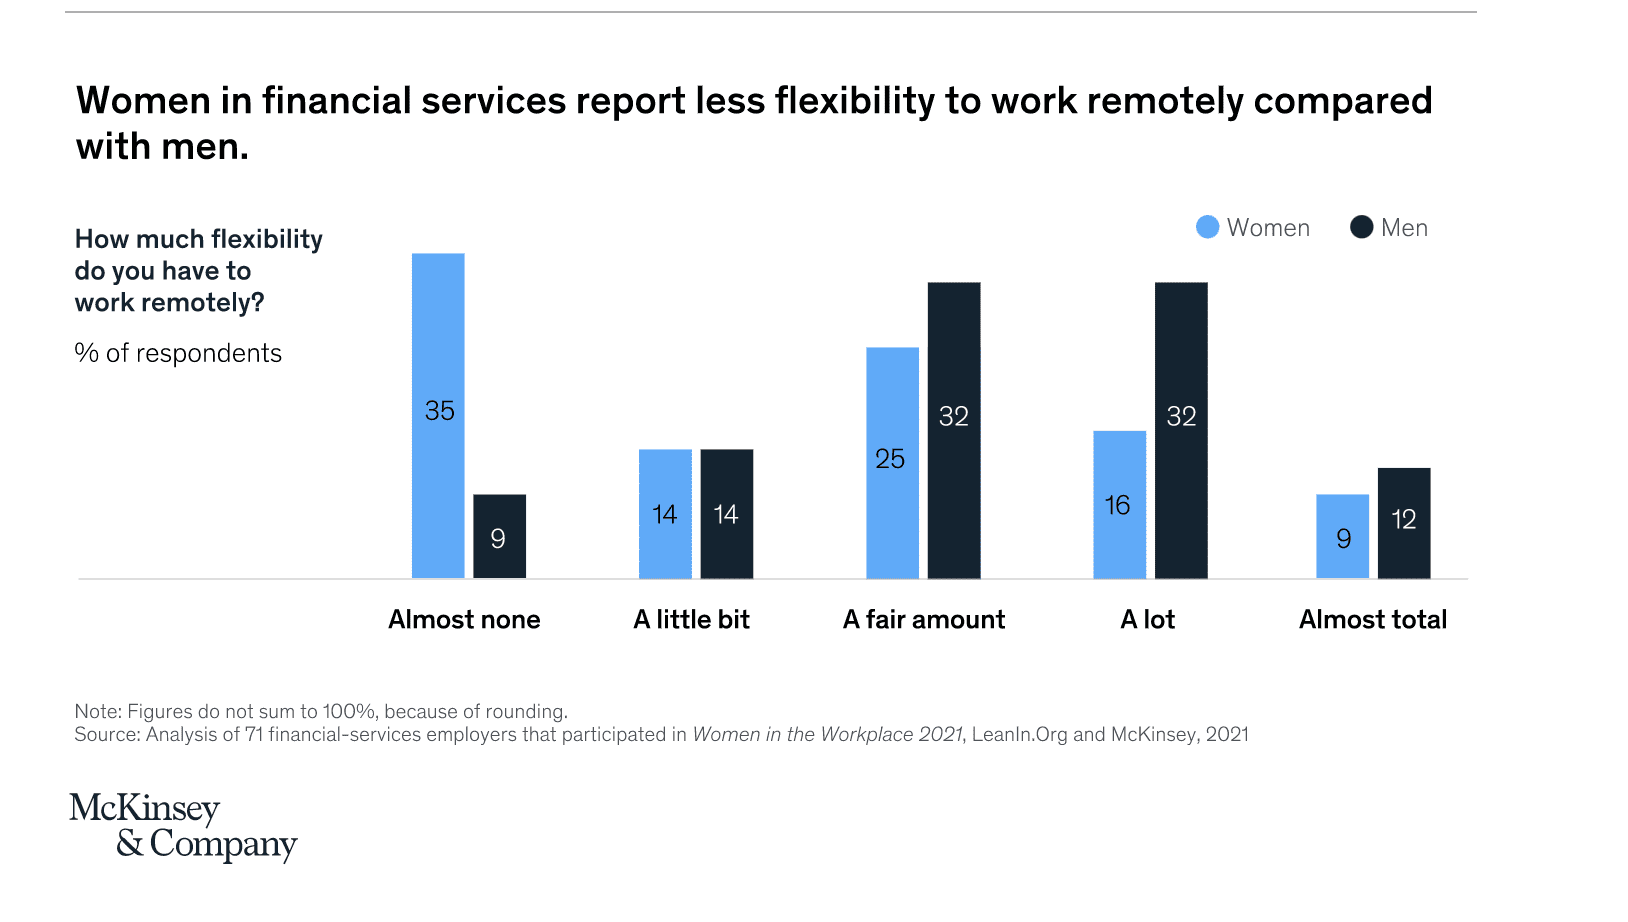 graph showing differences in access to flexible working environments